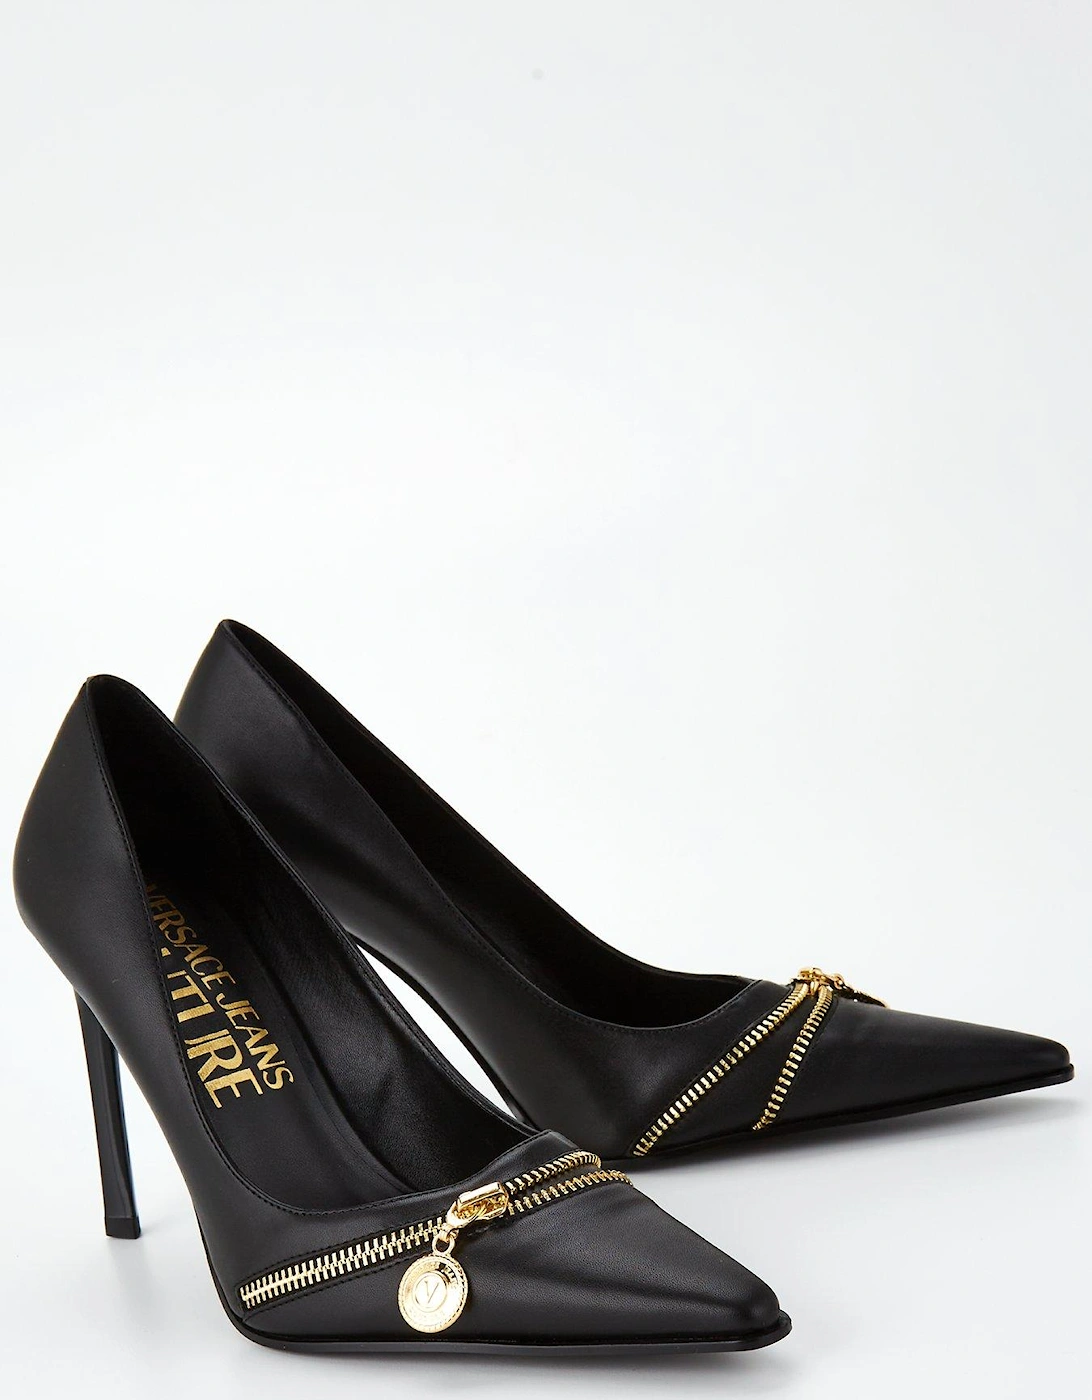 Jeans Couture Pointy Toe Zip Pump Heel - Black